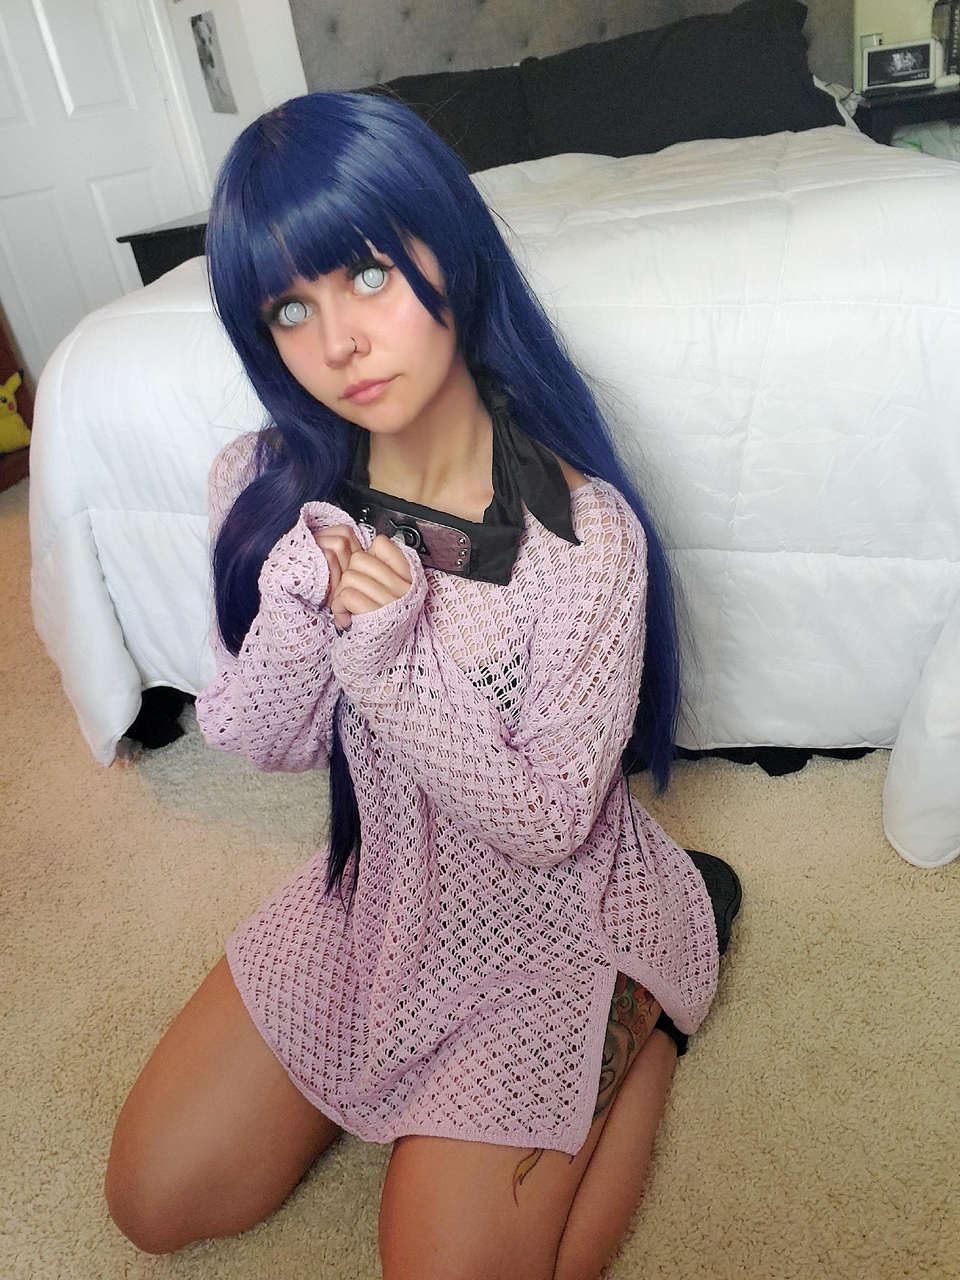 Casual Hinata By Soot Sprite 